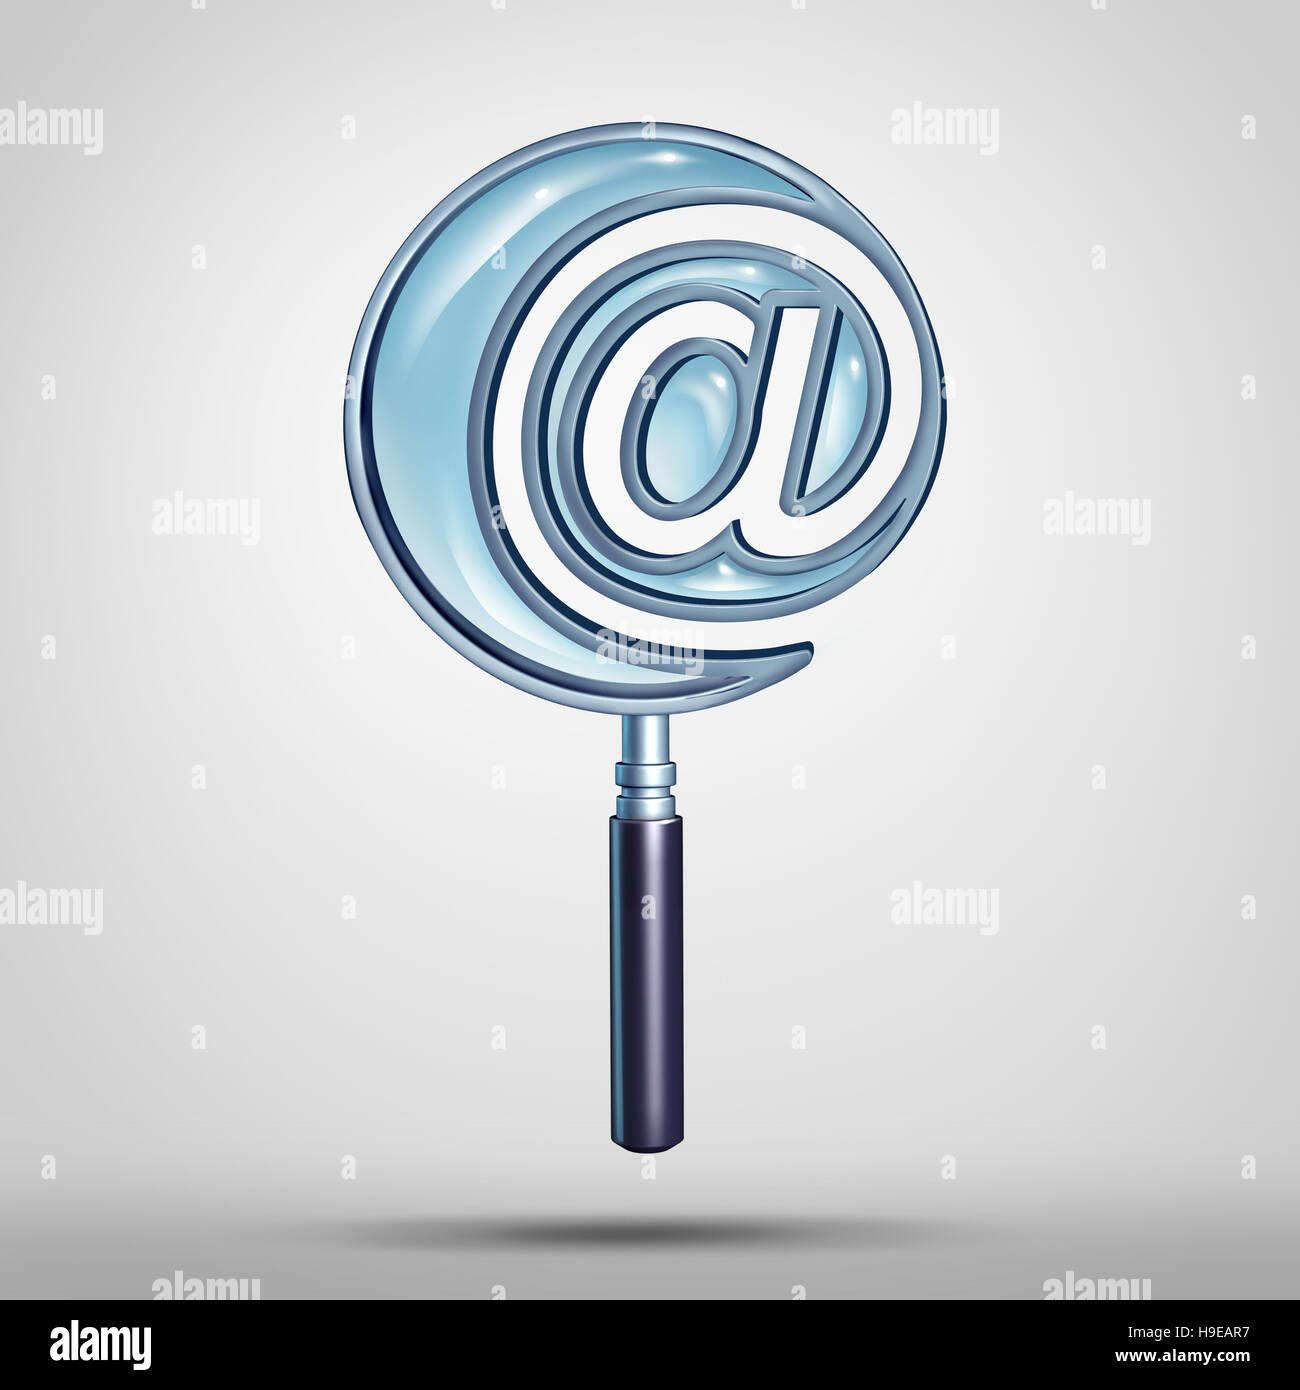 Email and internet search technology concept as a magnifying glass shaped as an e-mail symbol or at sign icon as a cyber and website address  metaphor Stock Photo